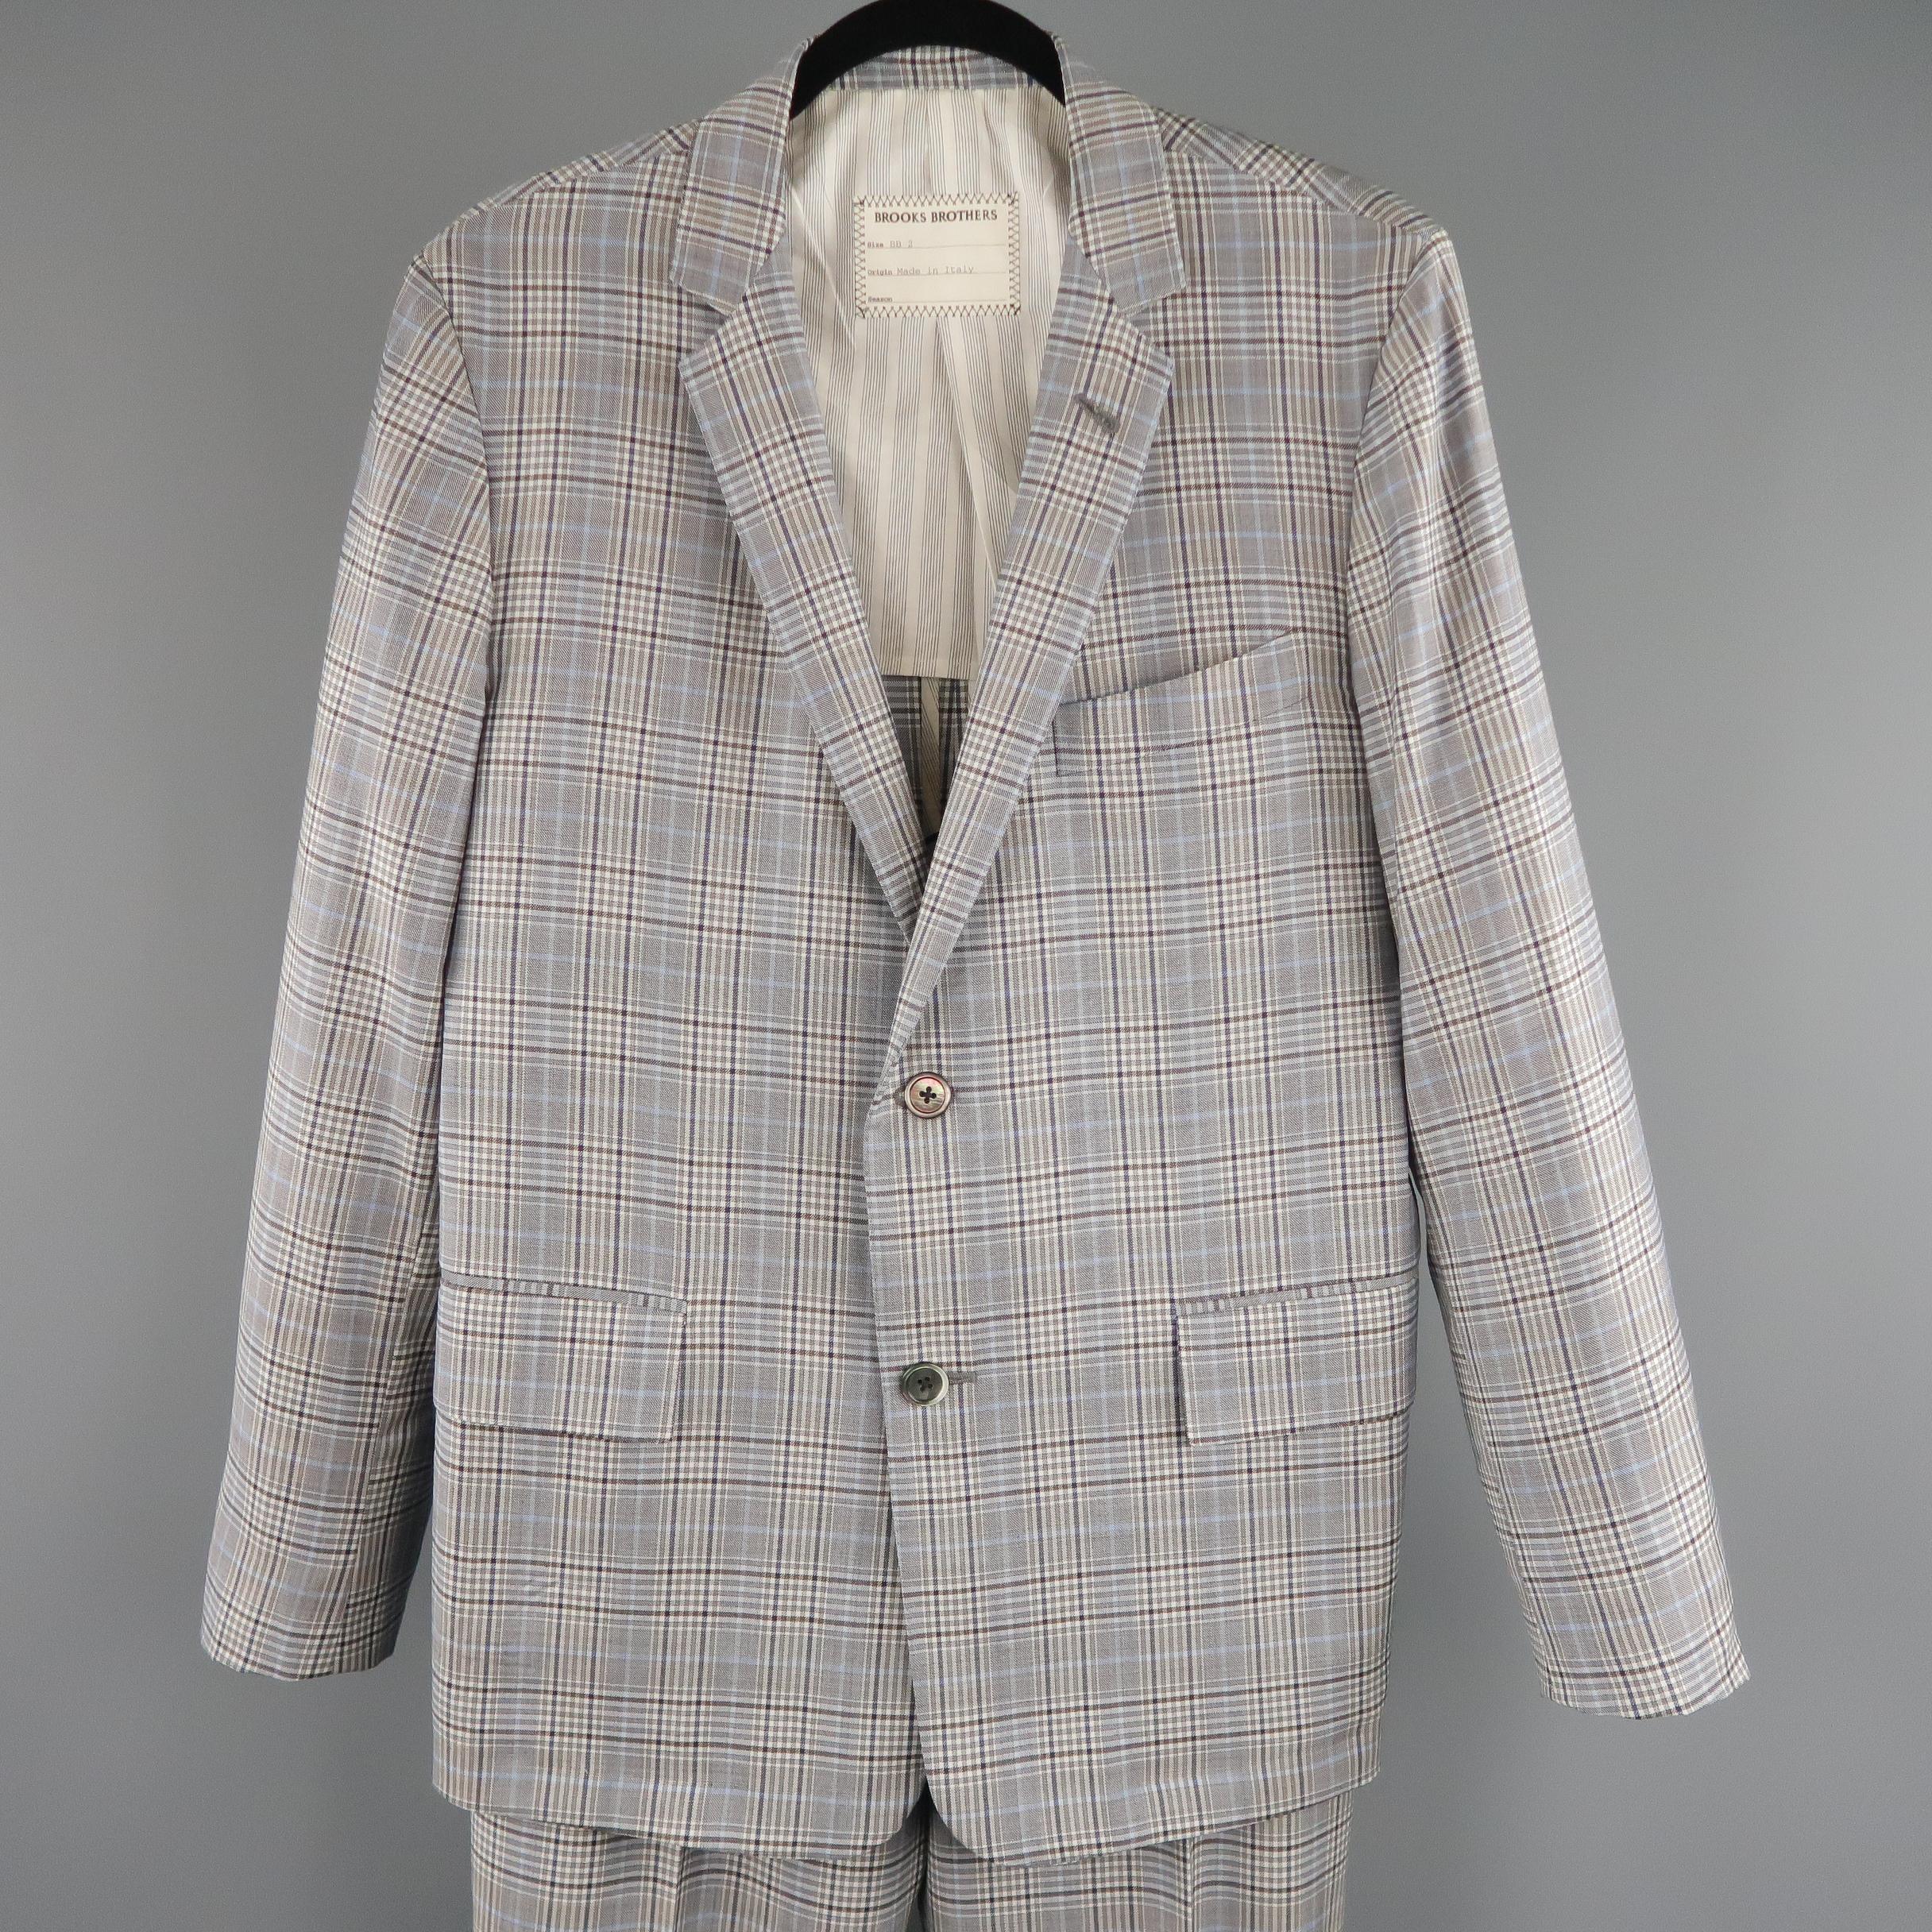 This two piece BROOKS BROTHERS suit comes in  gray and blue plaid wool blend fabric and includes a single breasted, two button sport coat with notch lapel, functional button cuffs,  and matching flat front, cuffed trousers. Made in Italy.
